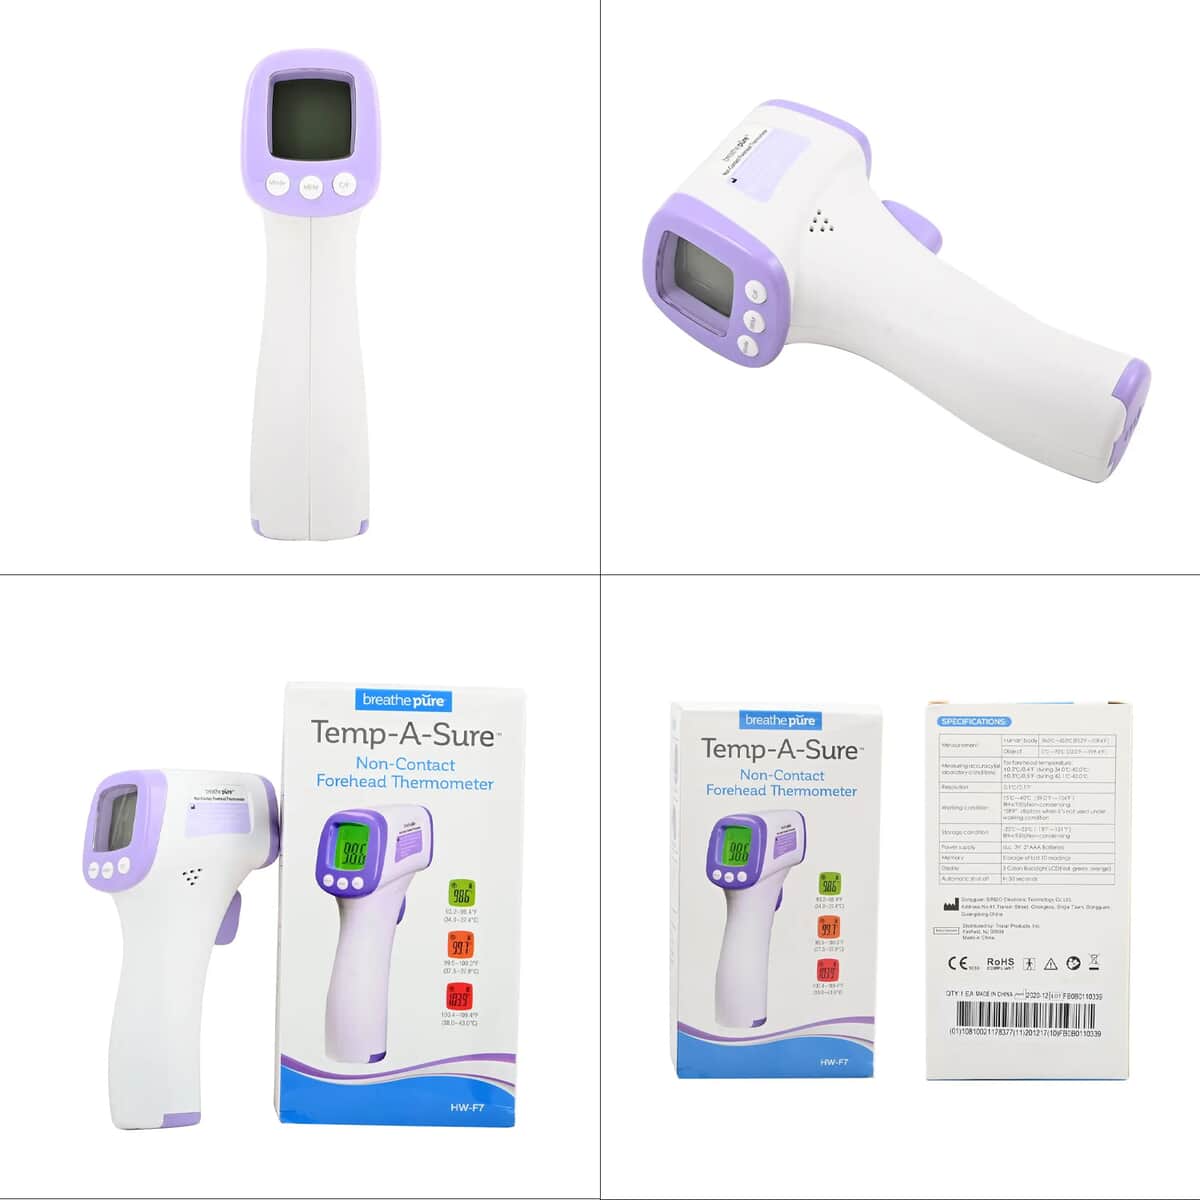 Breathepure Non-contact Forehead Thermometer image number 6